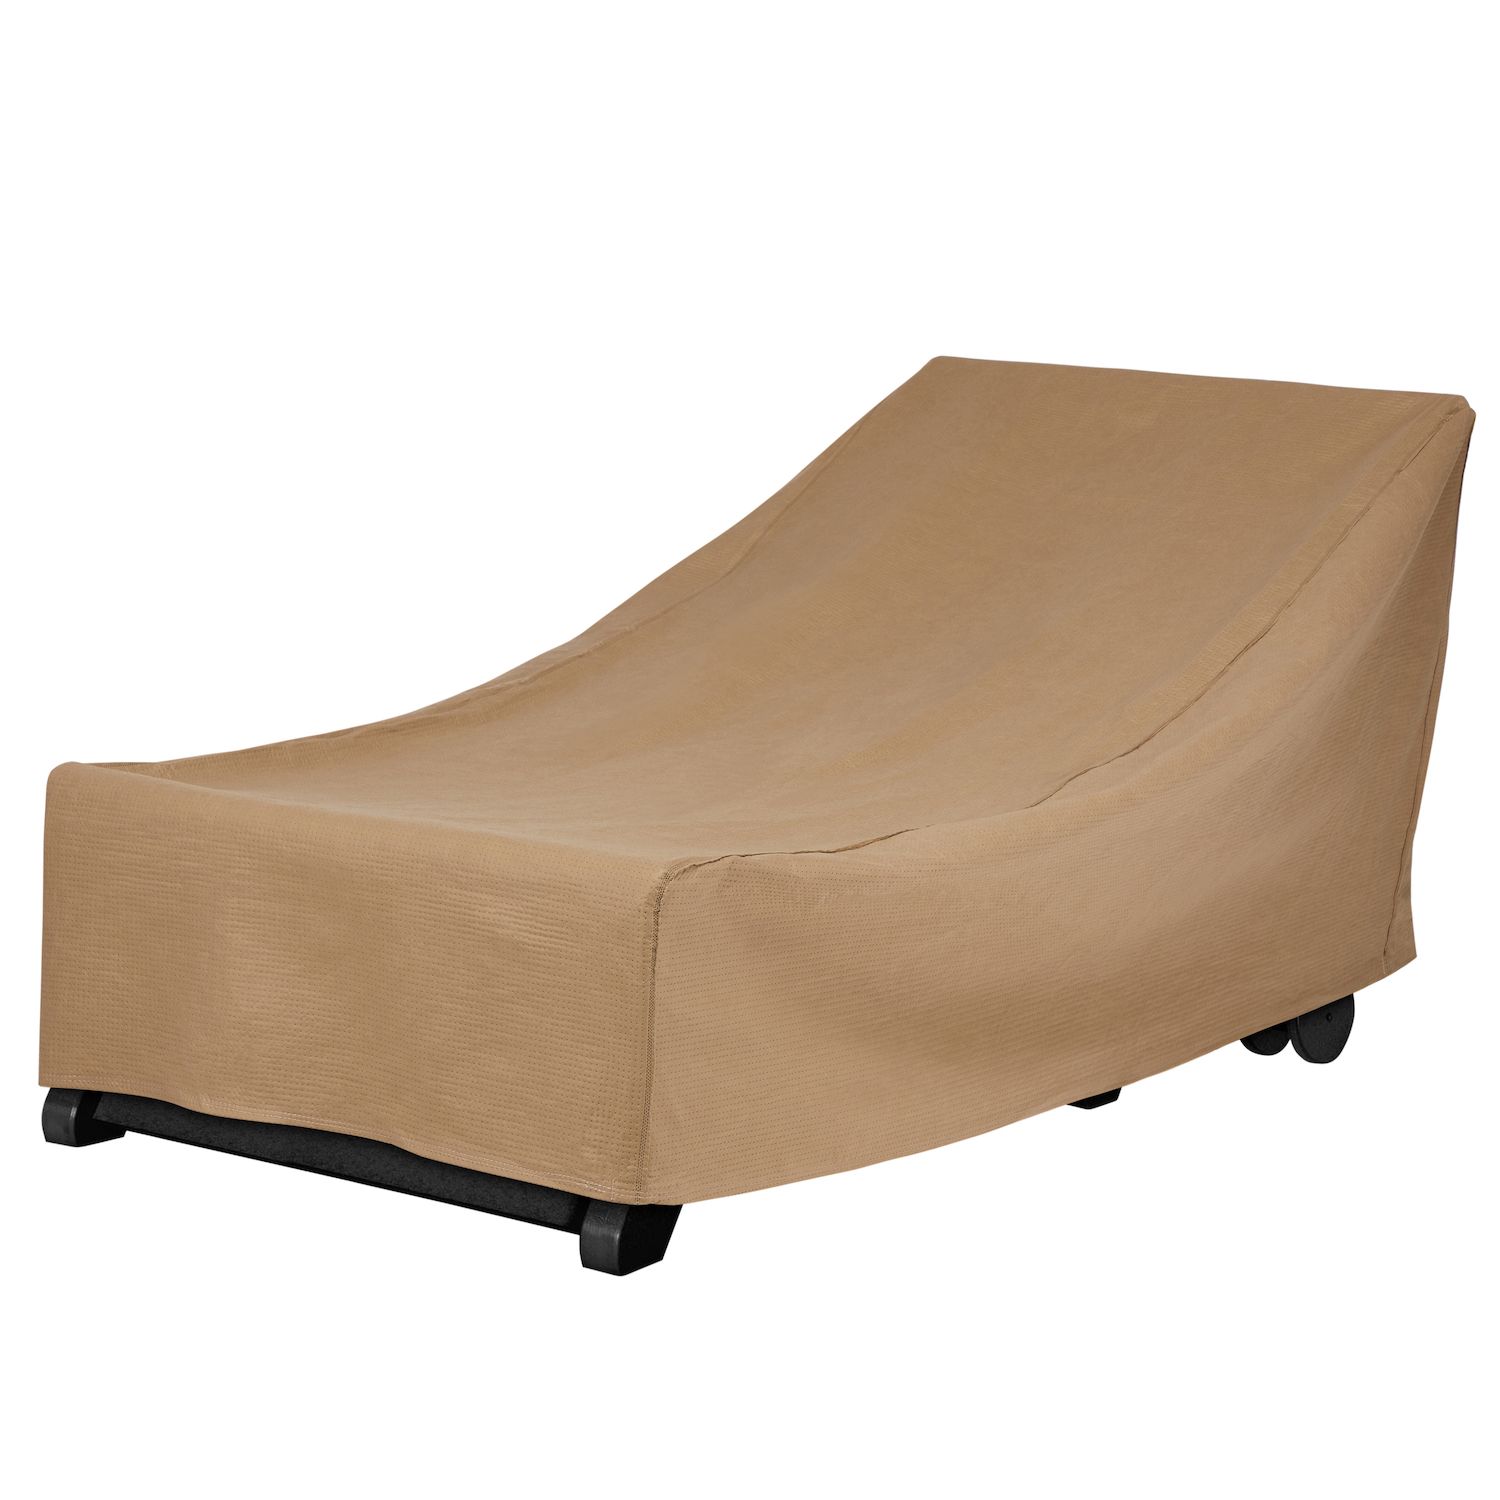 Image for Duck Covers Essential 66-in. Chaise Lounge Chair Cover at Kohl's.